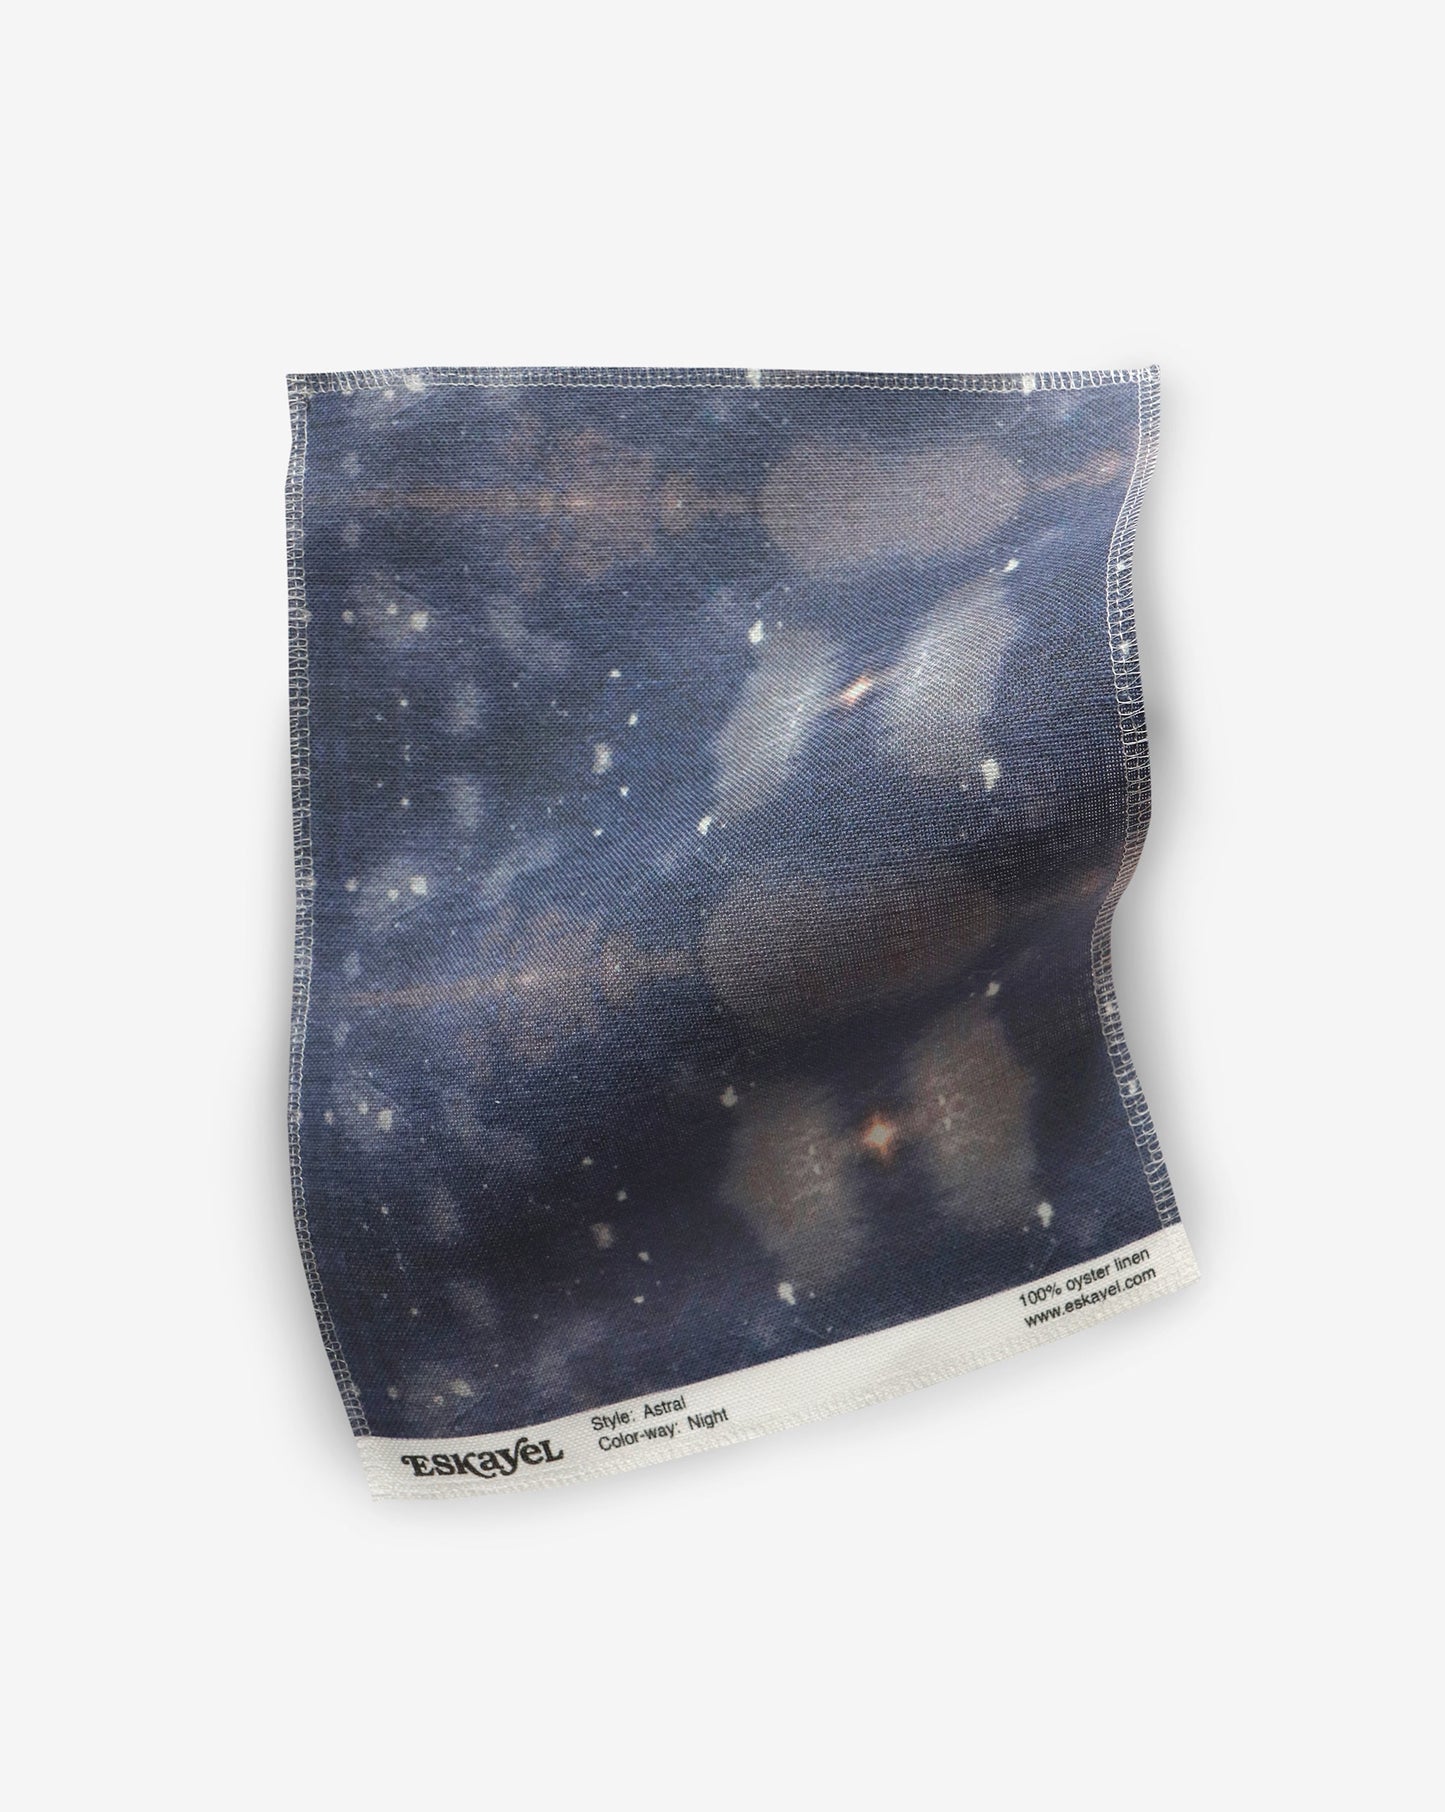 A fabric with an image of a starry sky is available for Astral Fabric Sample Night order